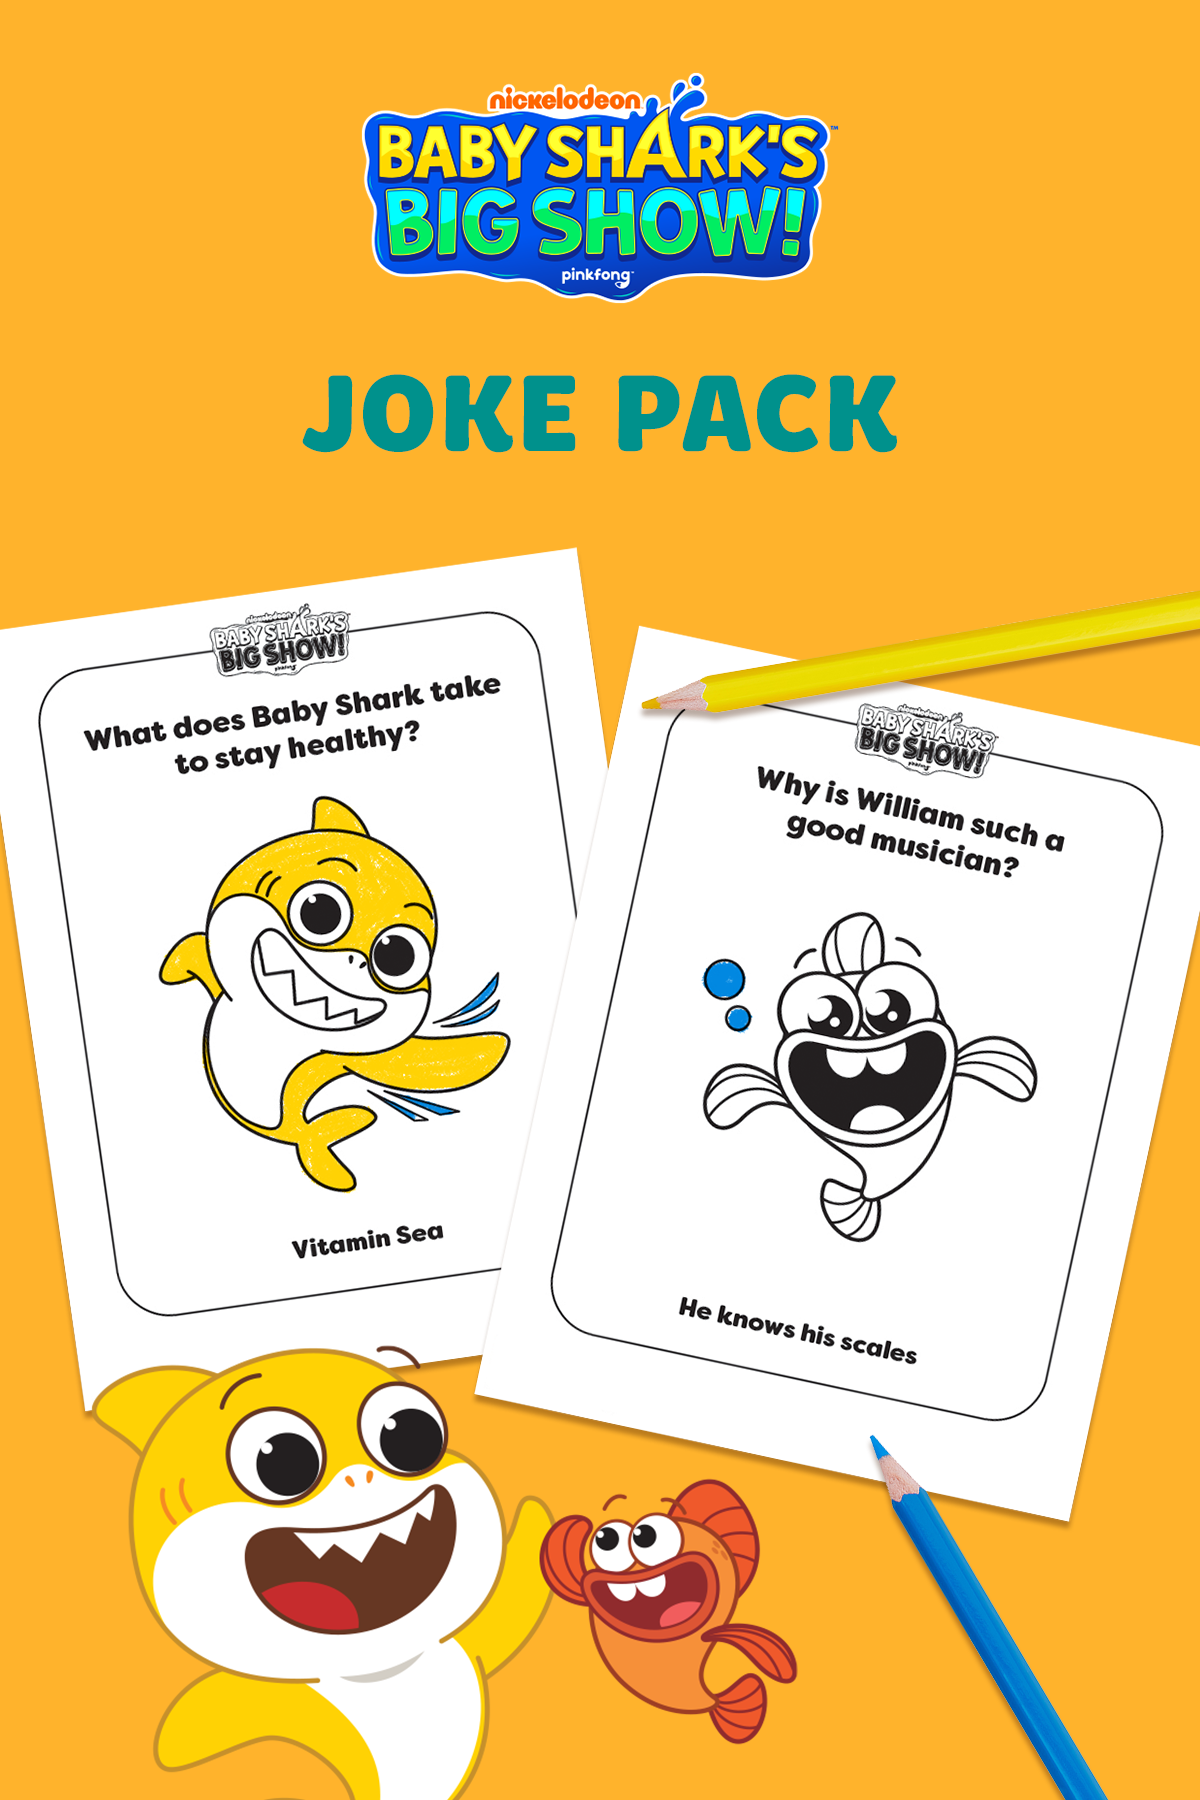 Show Your Teeth While Laughing at Baby Shark's Joke Pack | Nickelodeon  Parents